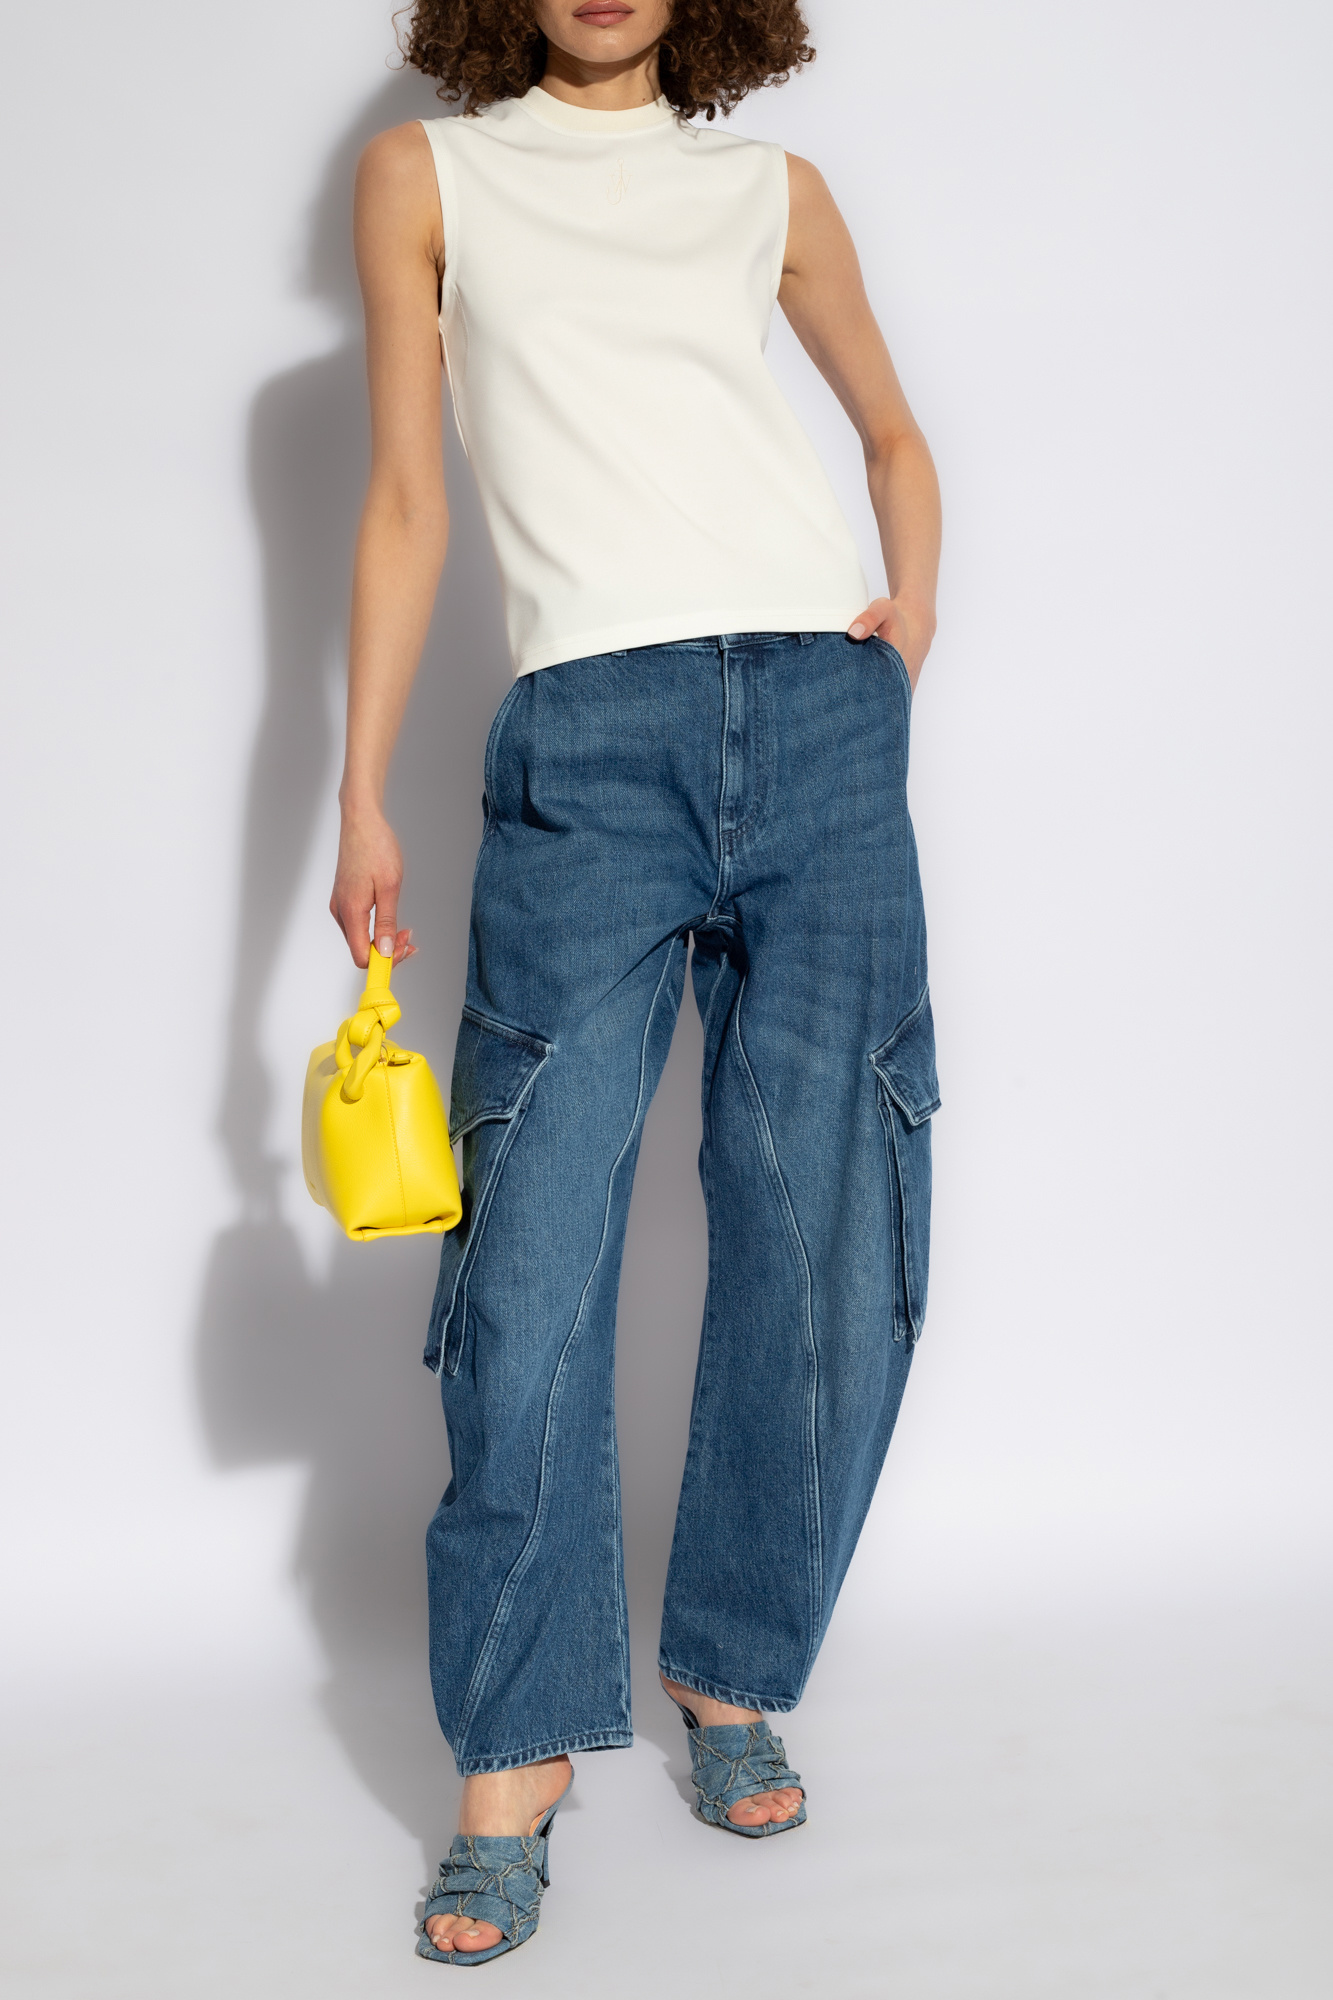 JW Anderson Cargo jeans